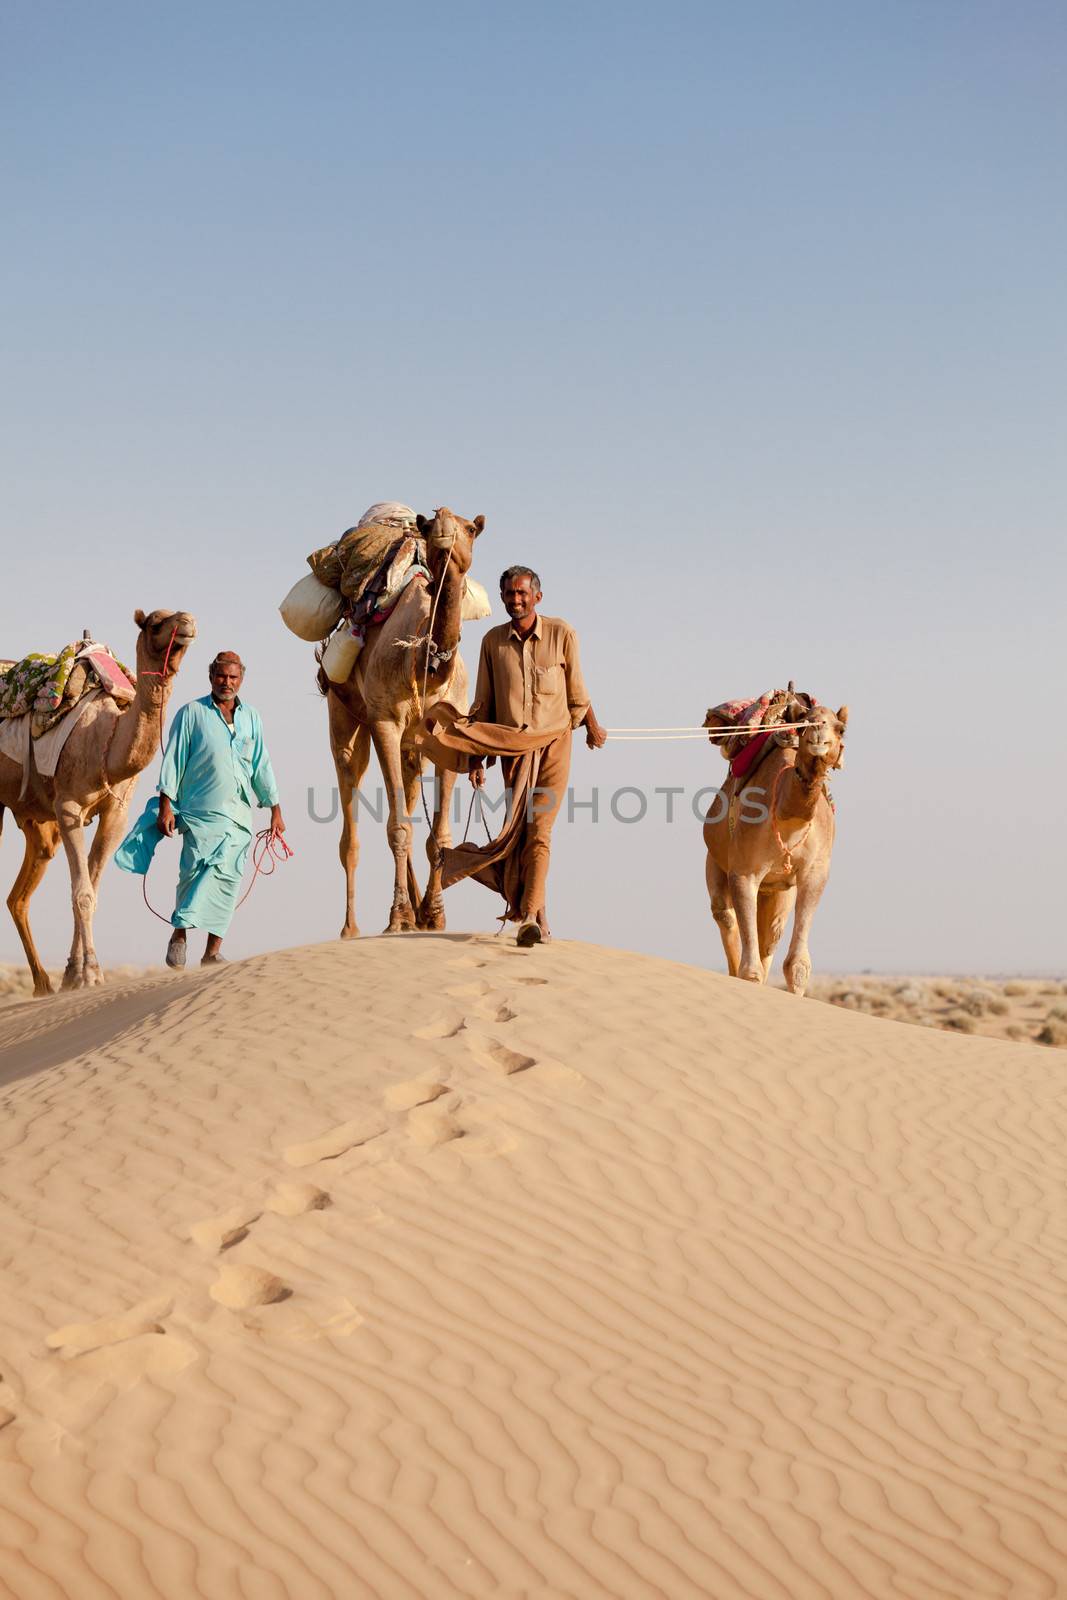 Caravan with bedouins and camels on gold dunes in desert at sunset under clean sky